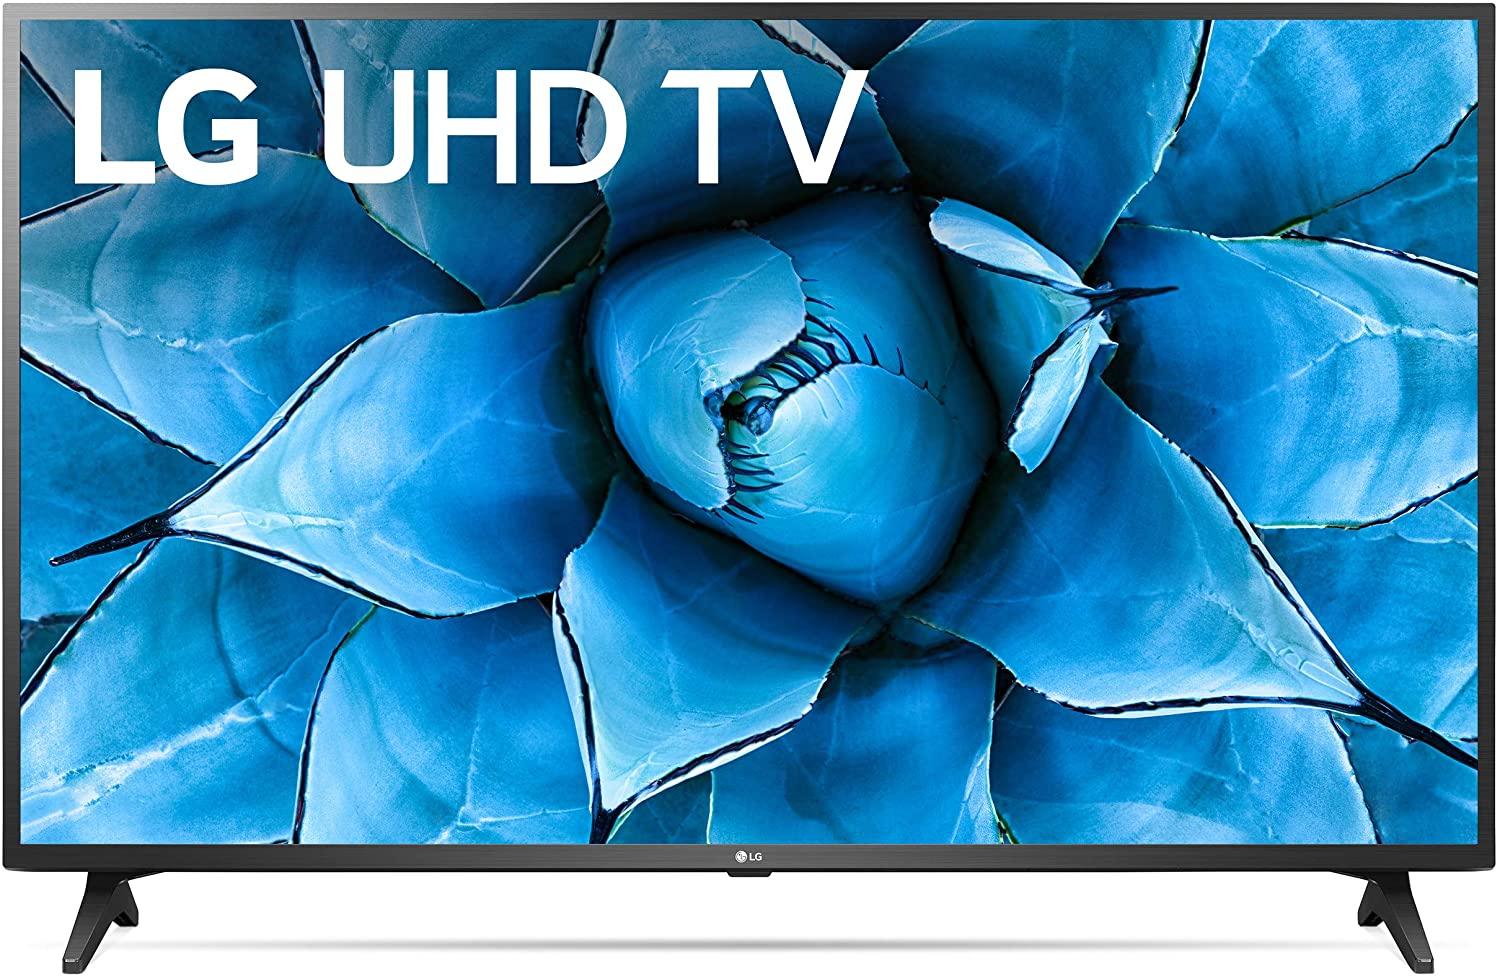 55in LG 55UN7300PUF 4K UHD LED Smart TV for $379.99 Shipped